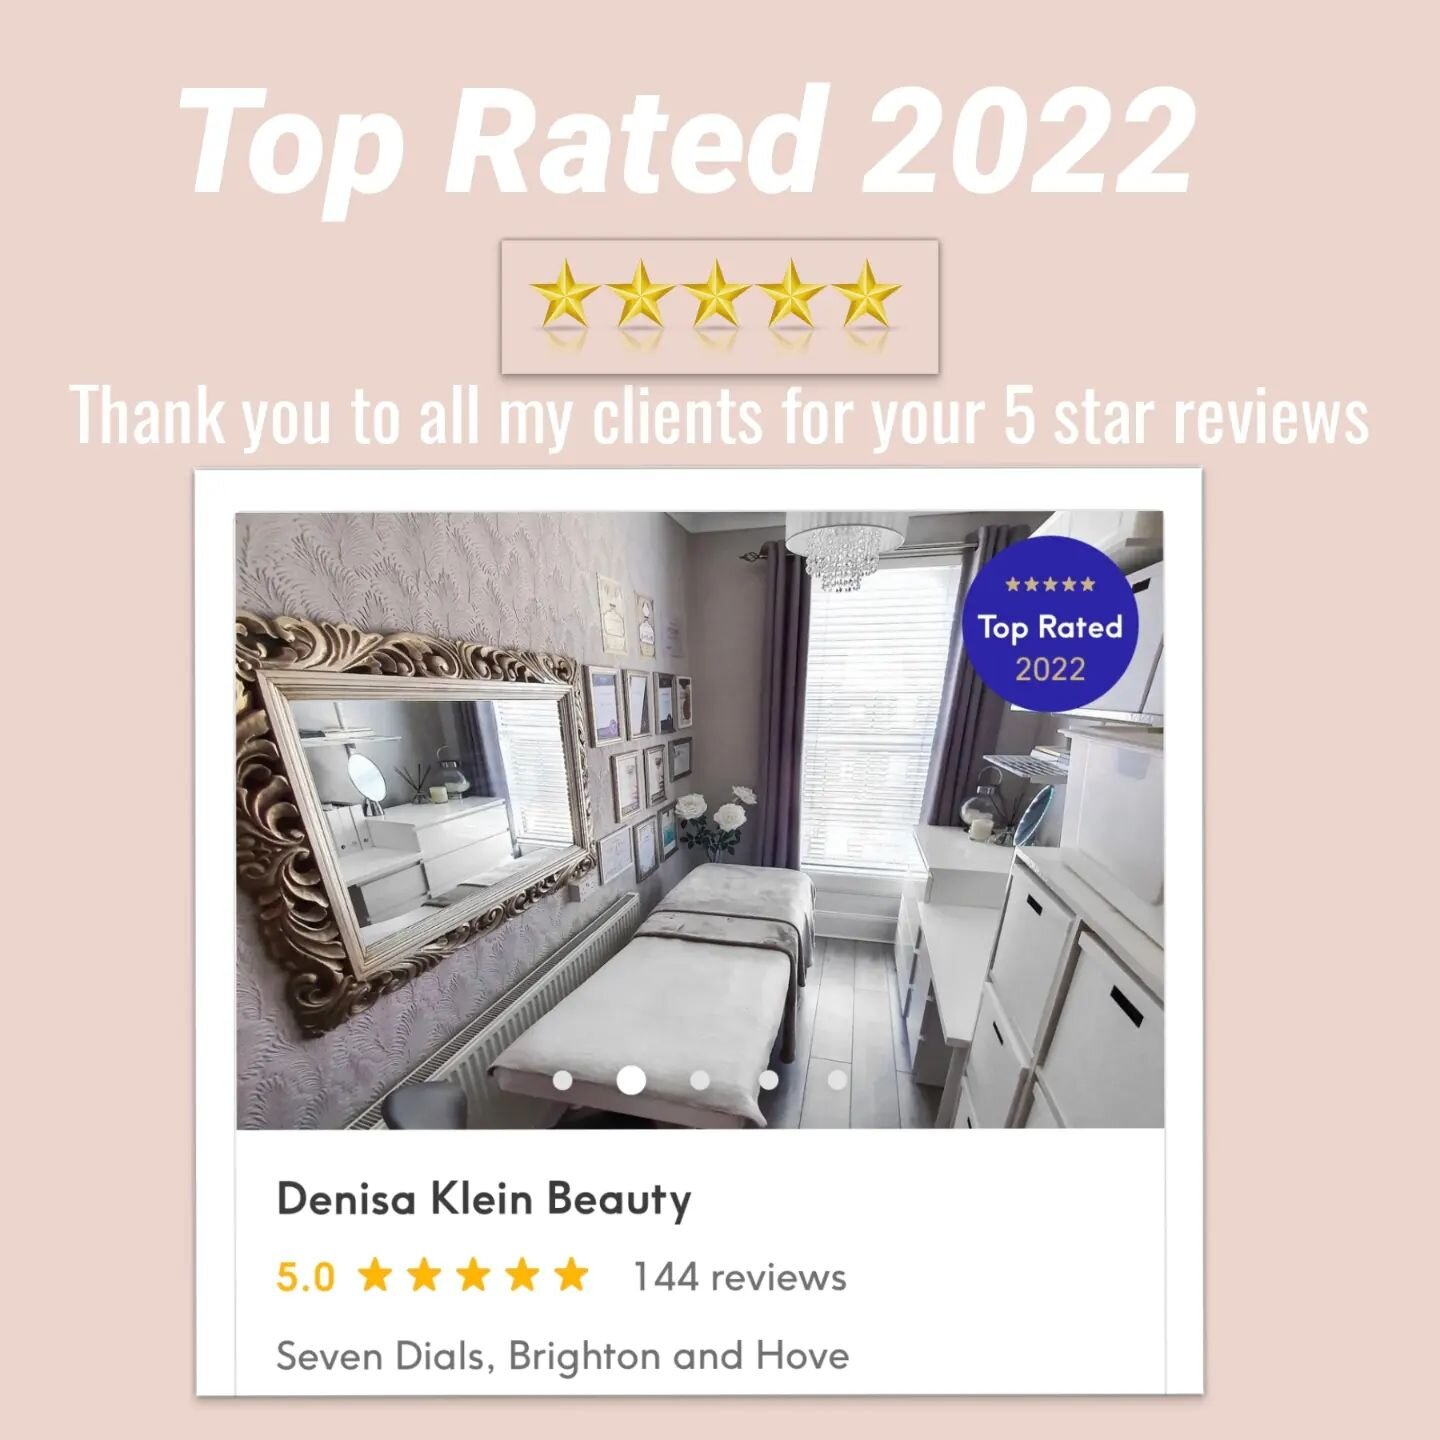 Another year TOP RATED 🥳🥳🥳
I&rsquo;m over the moon!🤩

I just found out that my salon made it in &quot;Top Rated 2022&quot; again for this year with&nbsp;@treatwellpro_uk&nbsp;@treatwell_uk&nbsp;🎉 Thank you to all my lovely clients for being amaz